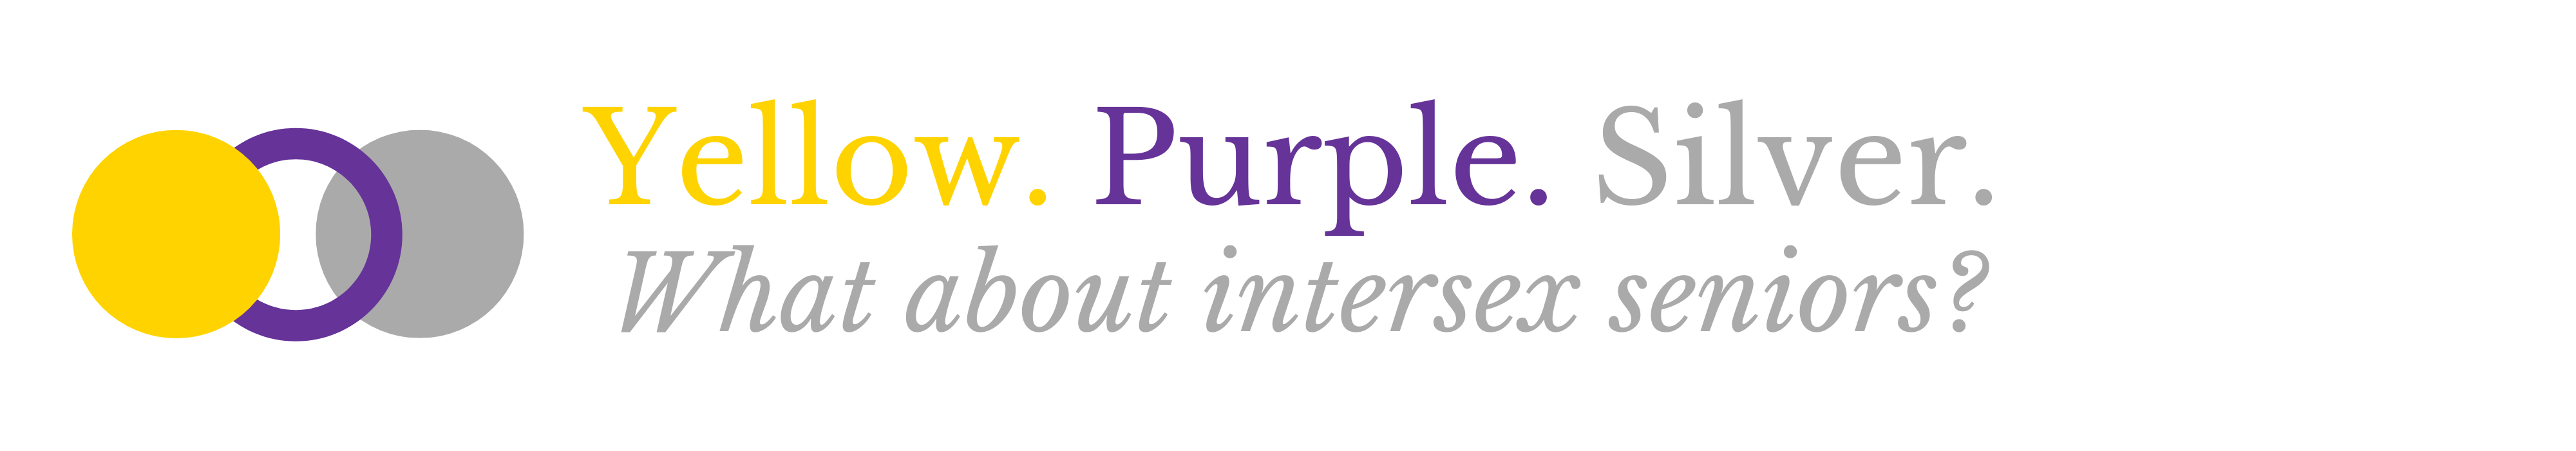 Header logo and text: Yellow. Purple. Silver. What about intersex seniors?